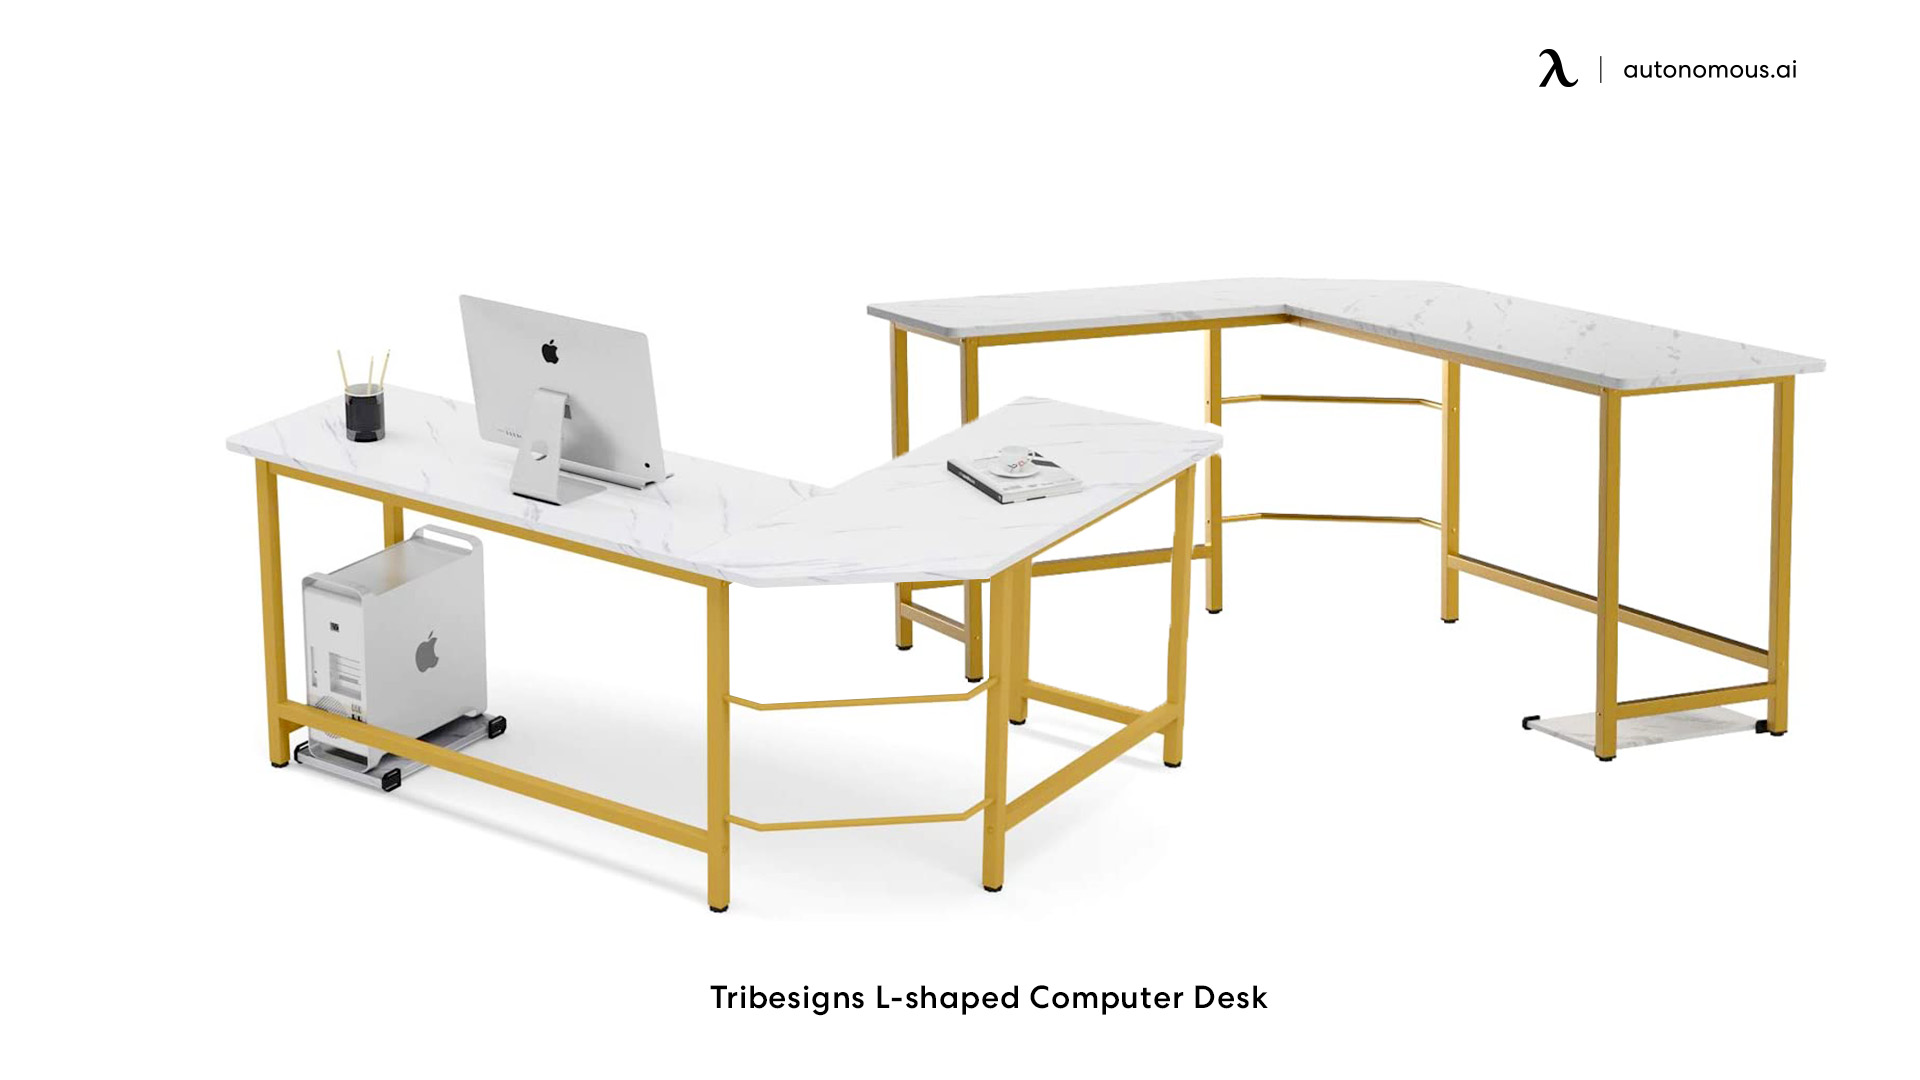 Tribesigns small L-shaped desk